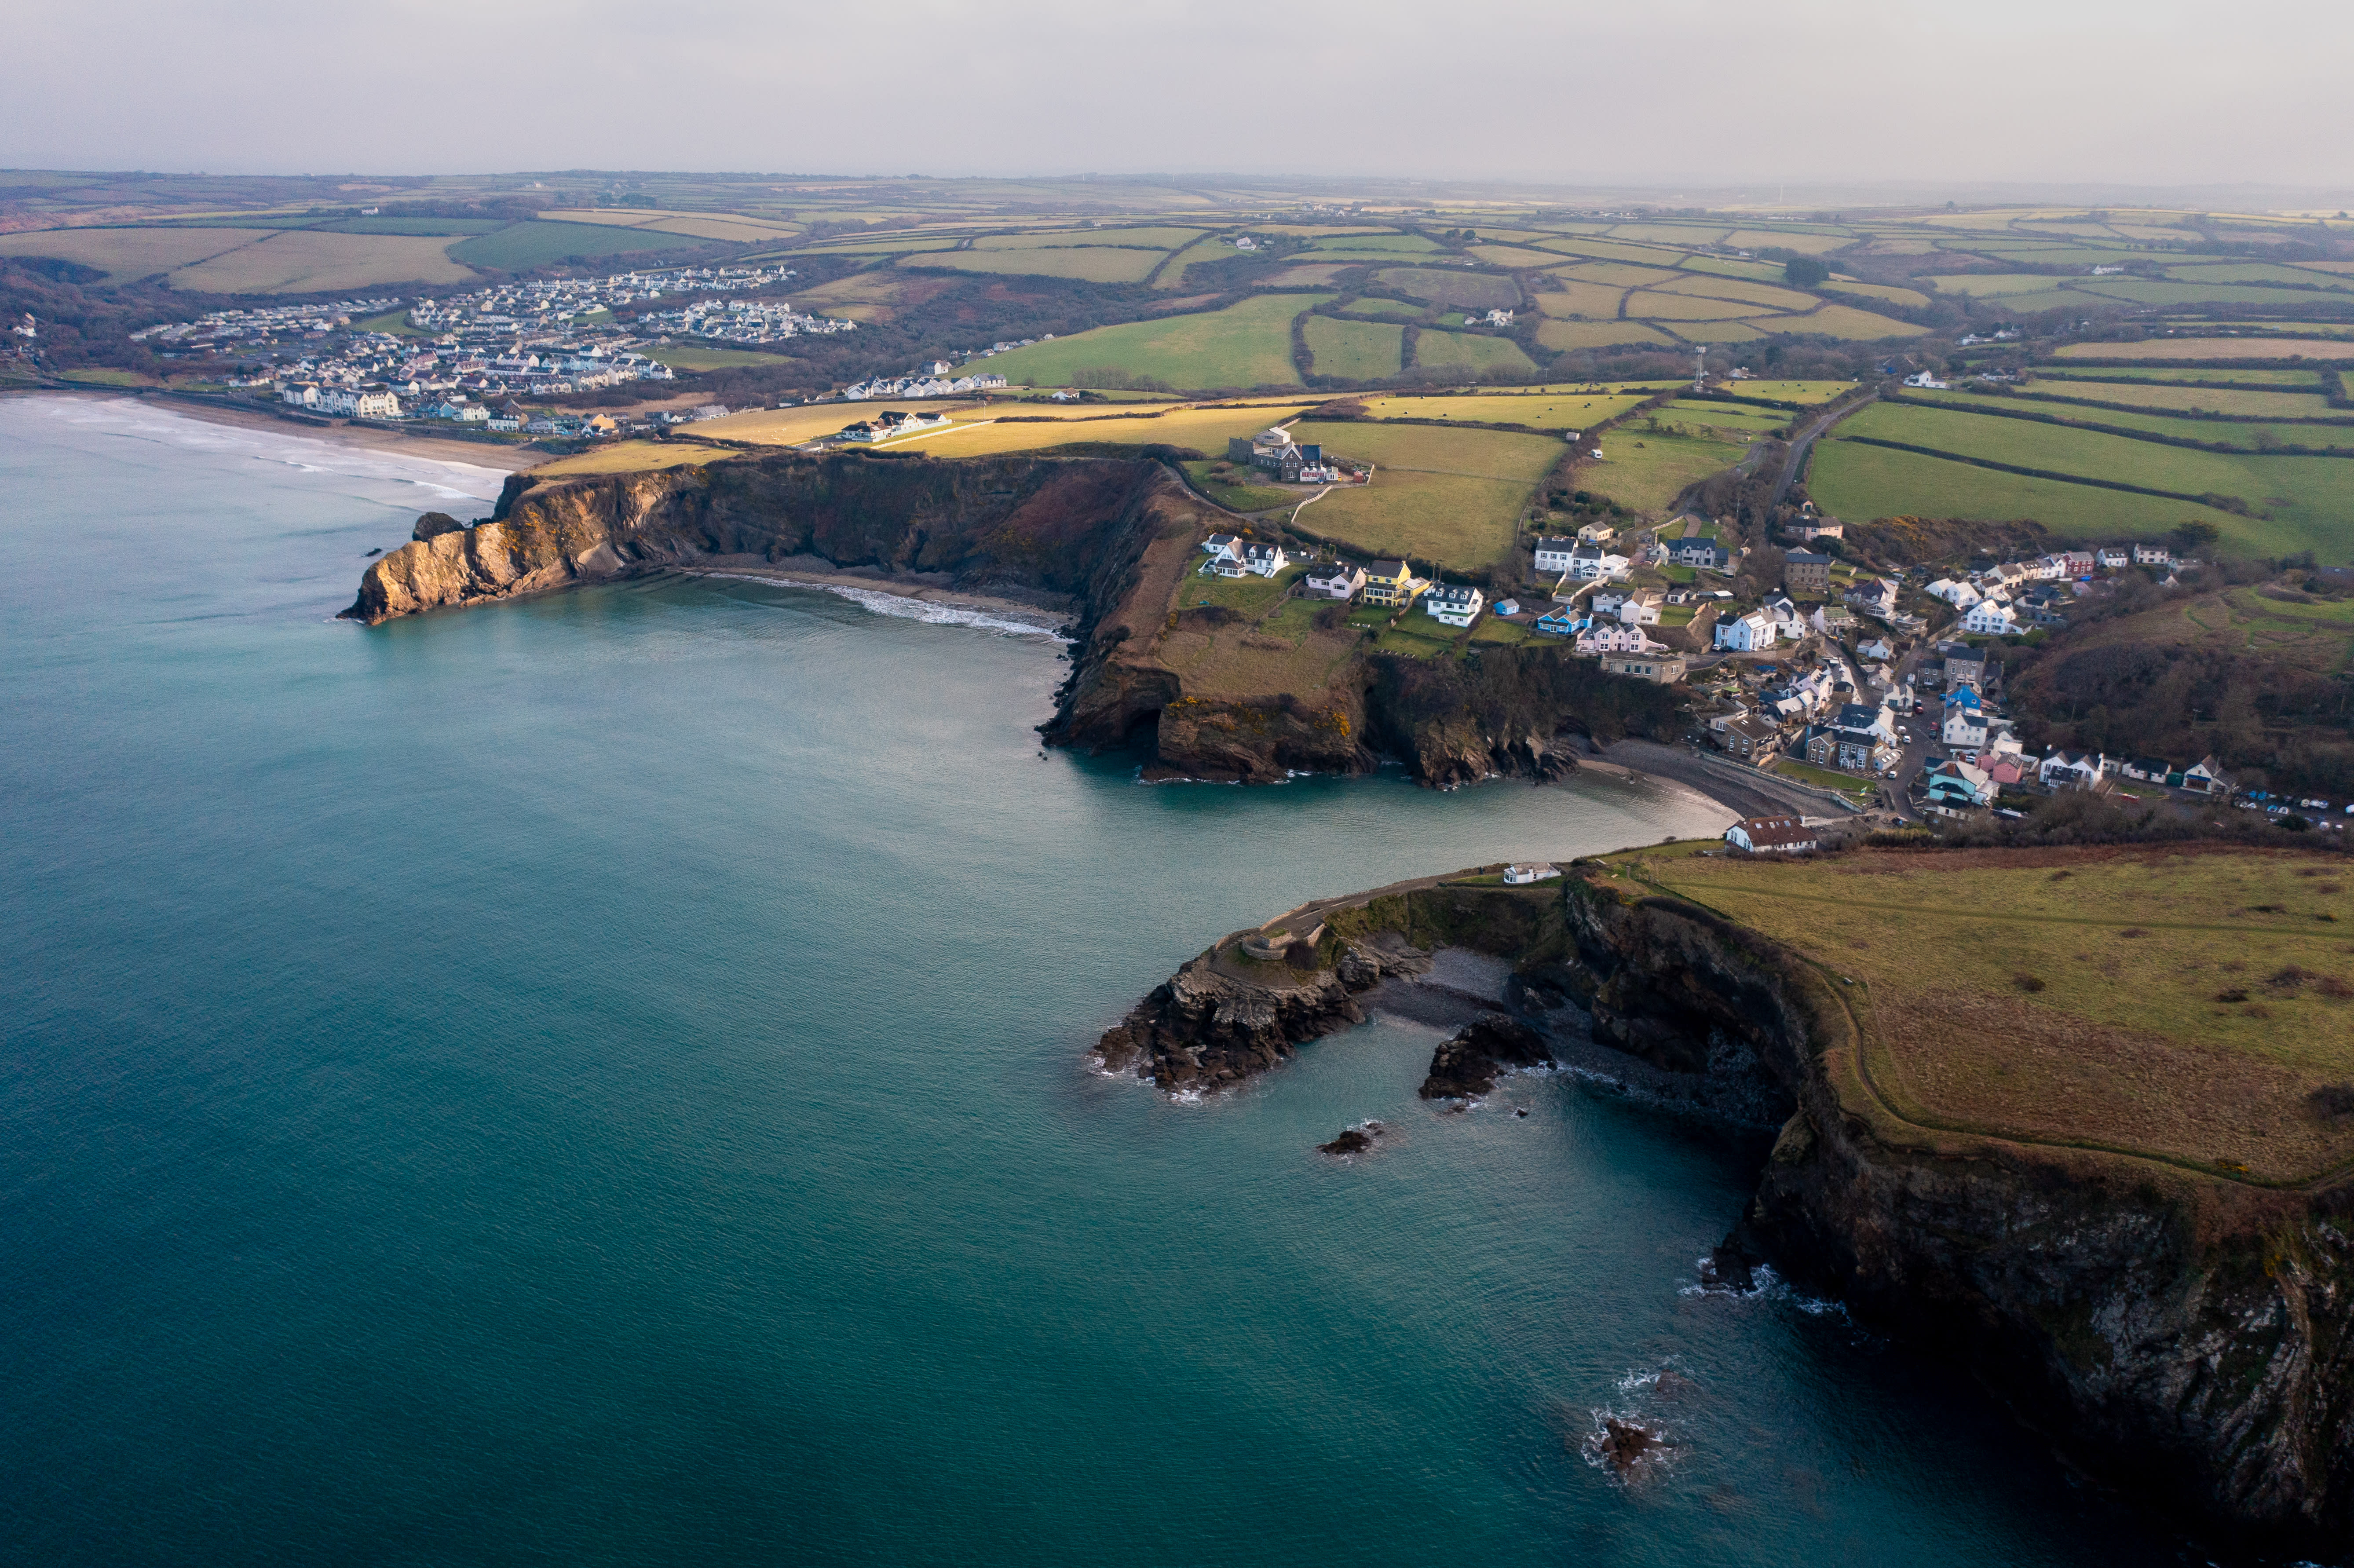 Aerial shot of coast and towns on Pembrokeshire coastline